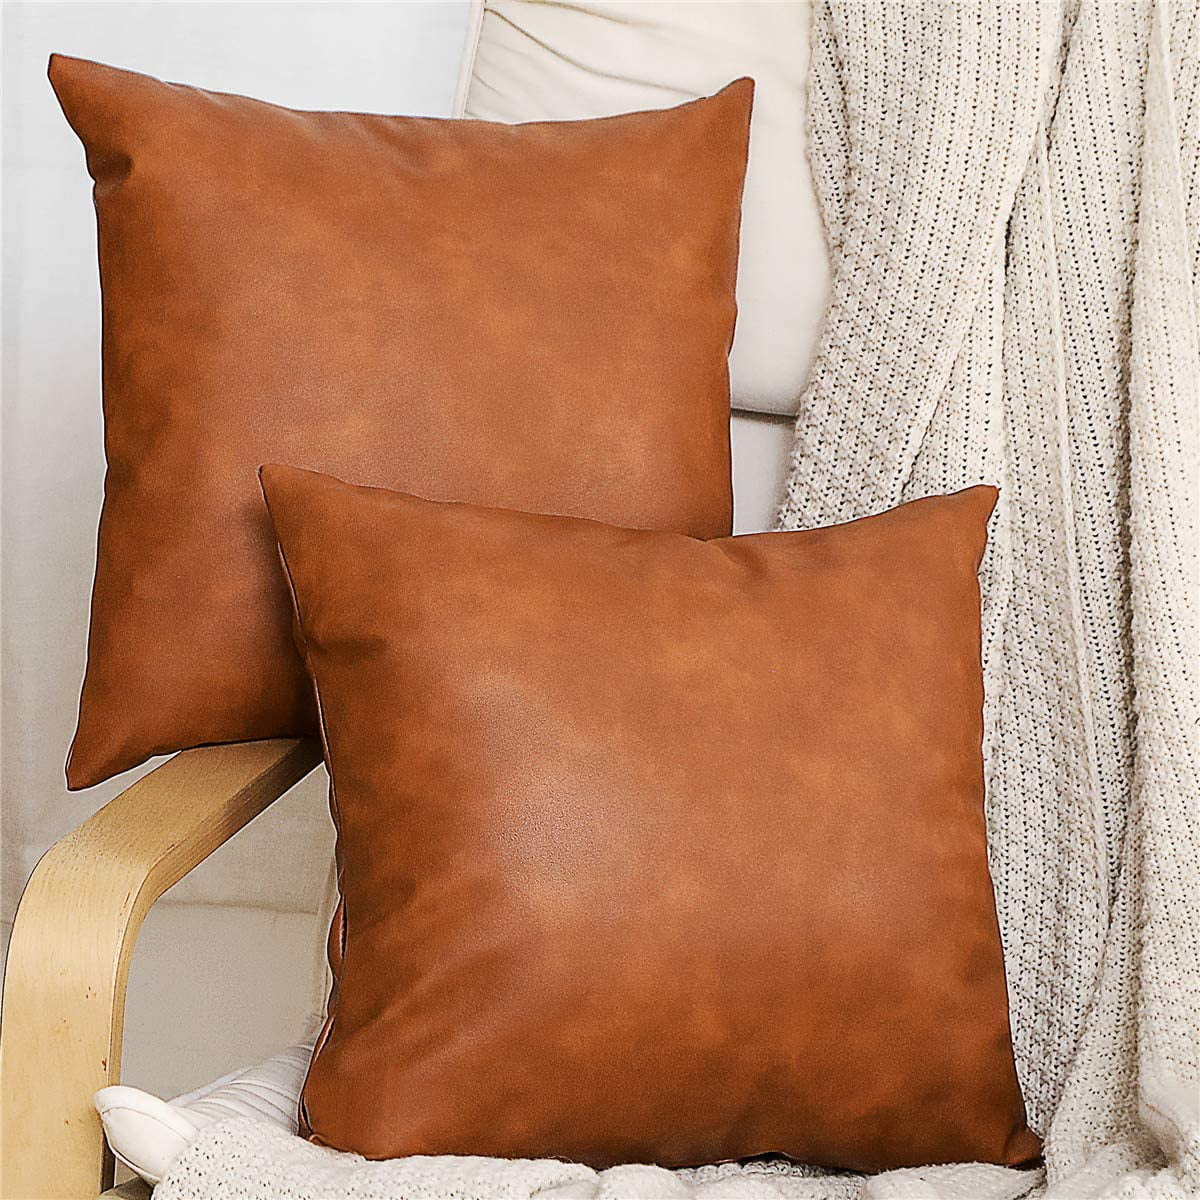 DecorX 2Pack Faux Leather Accent Throw Pillow Cover 18x18 inch, Modern Country Farmhouse Style